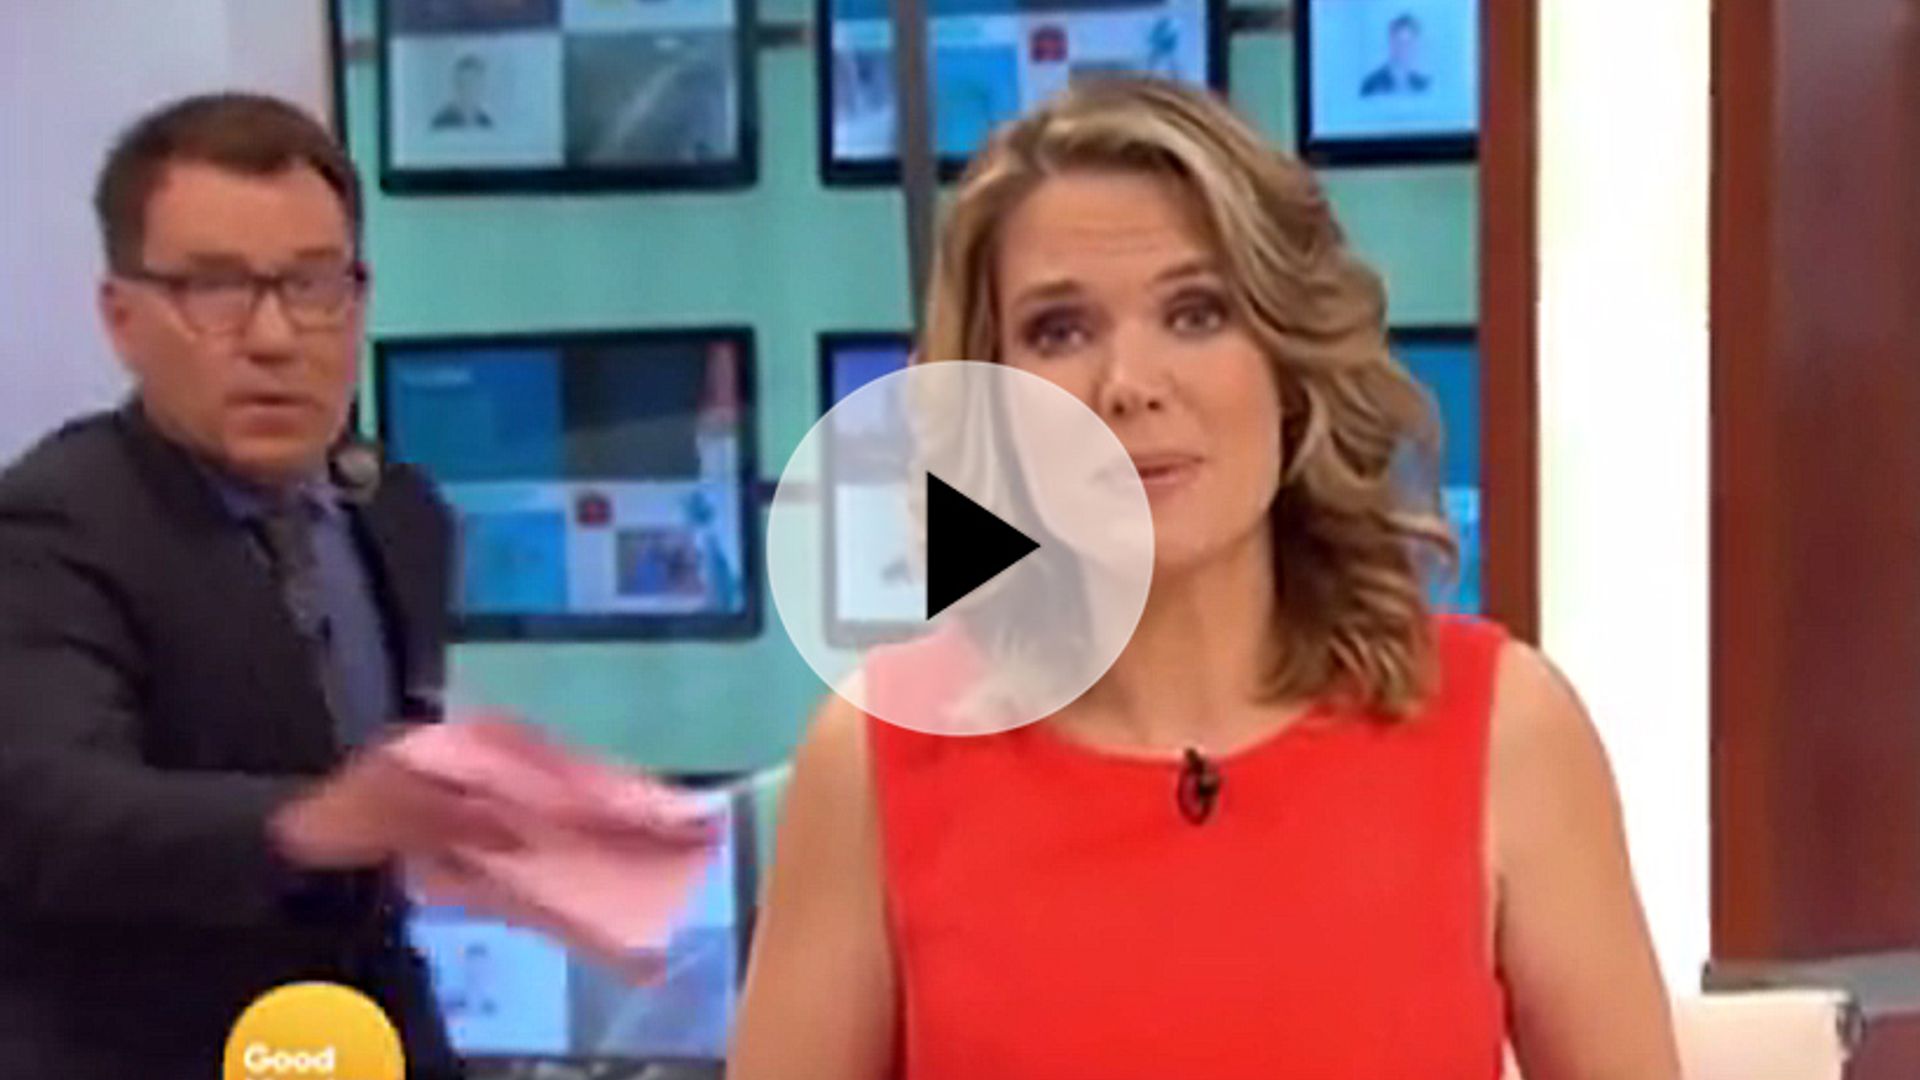 Charlotte Hawkins is video-bombed by Richard Arnold while reading the news live on air: watch!